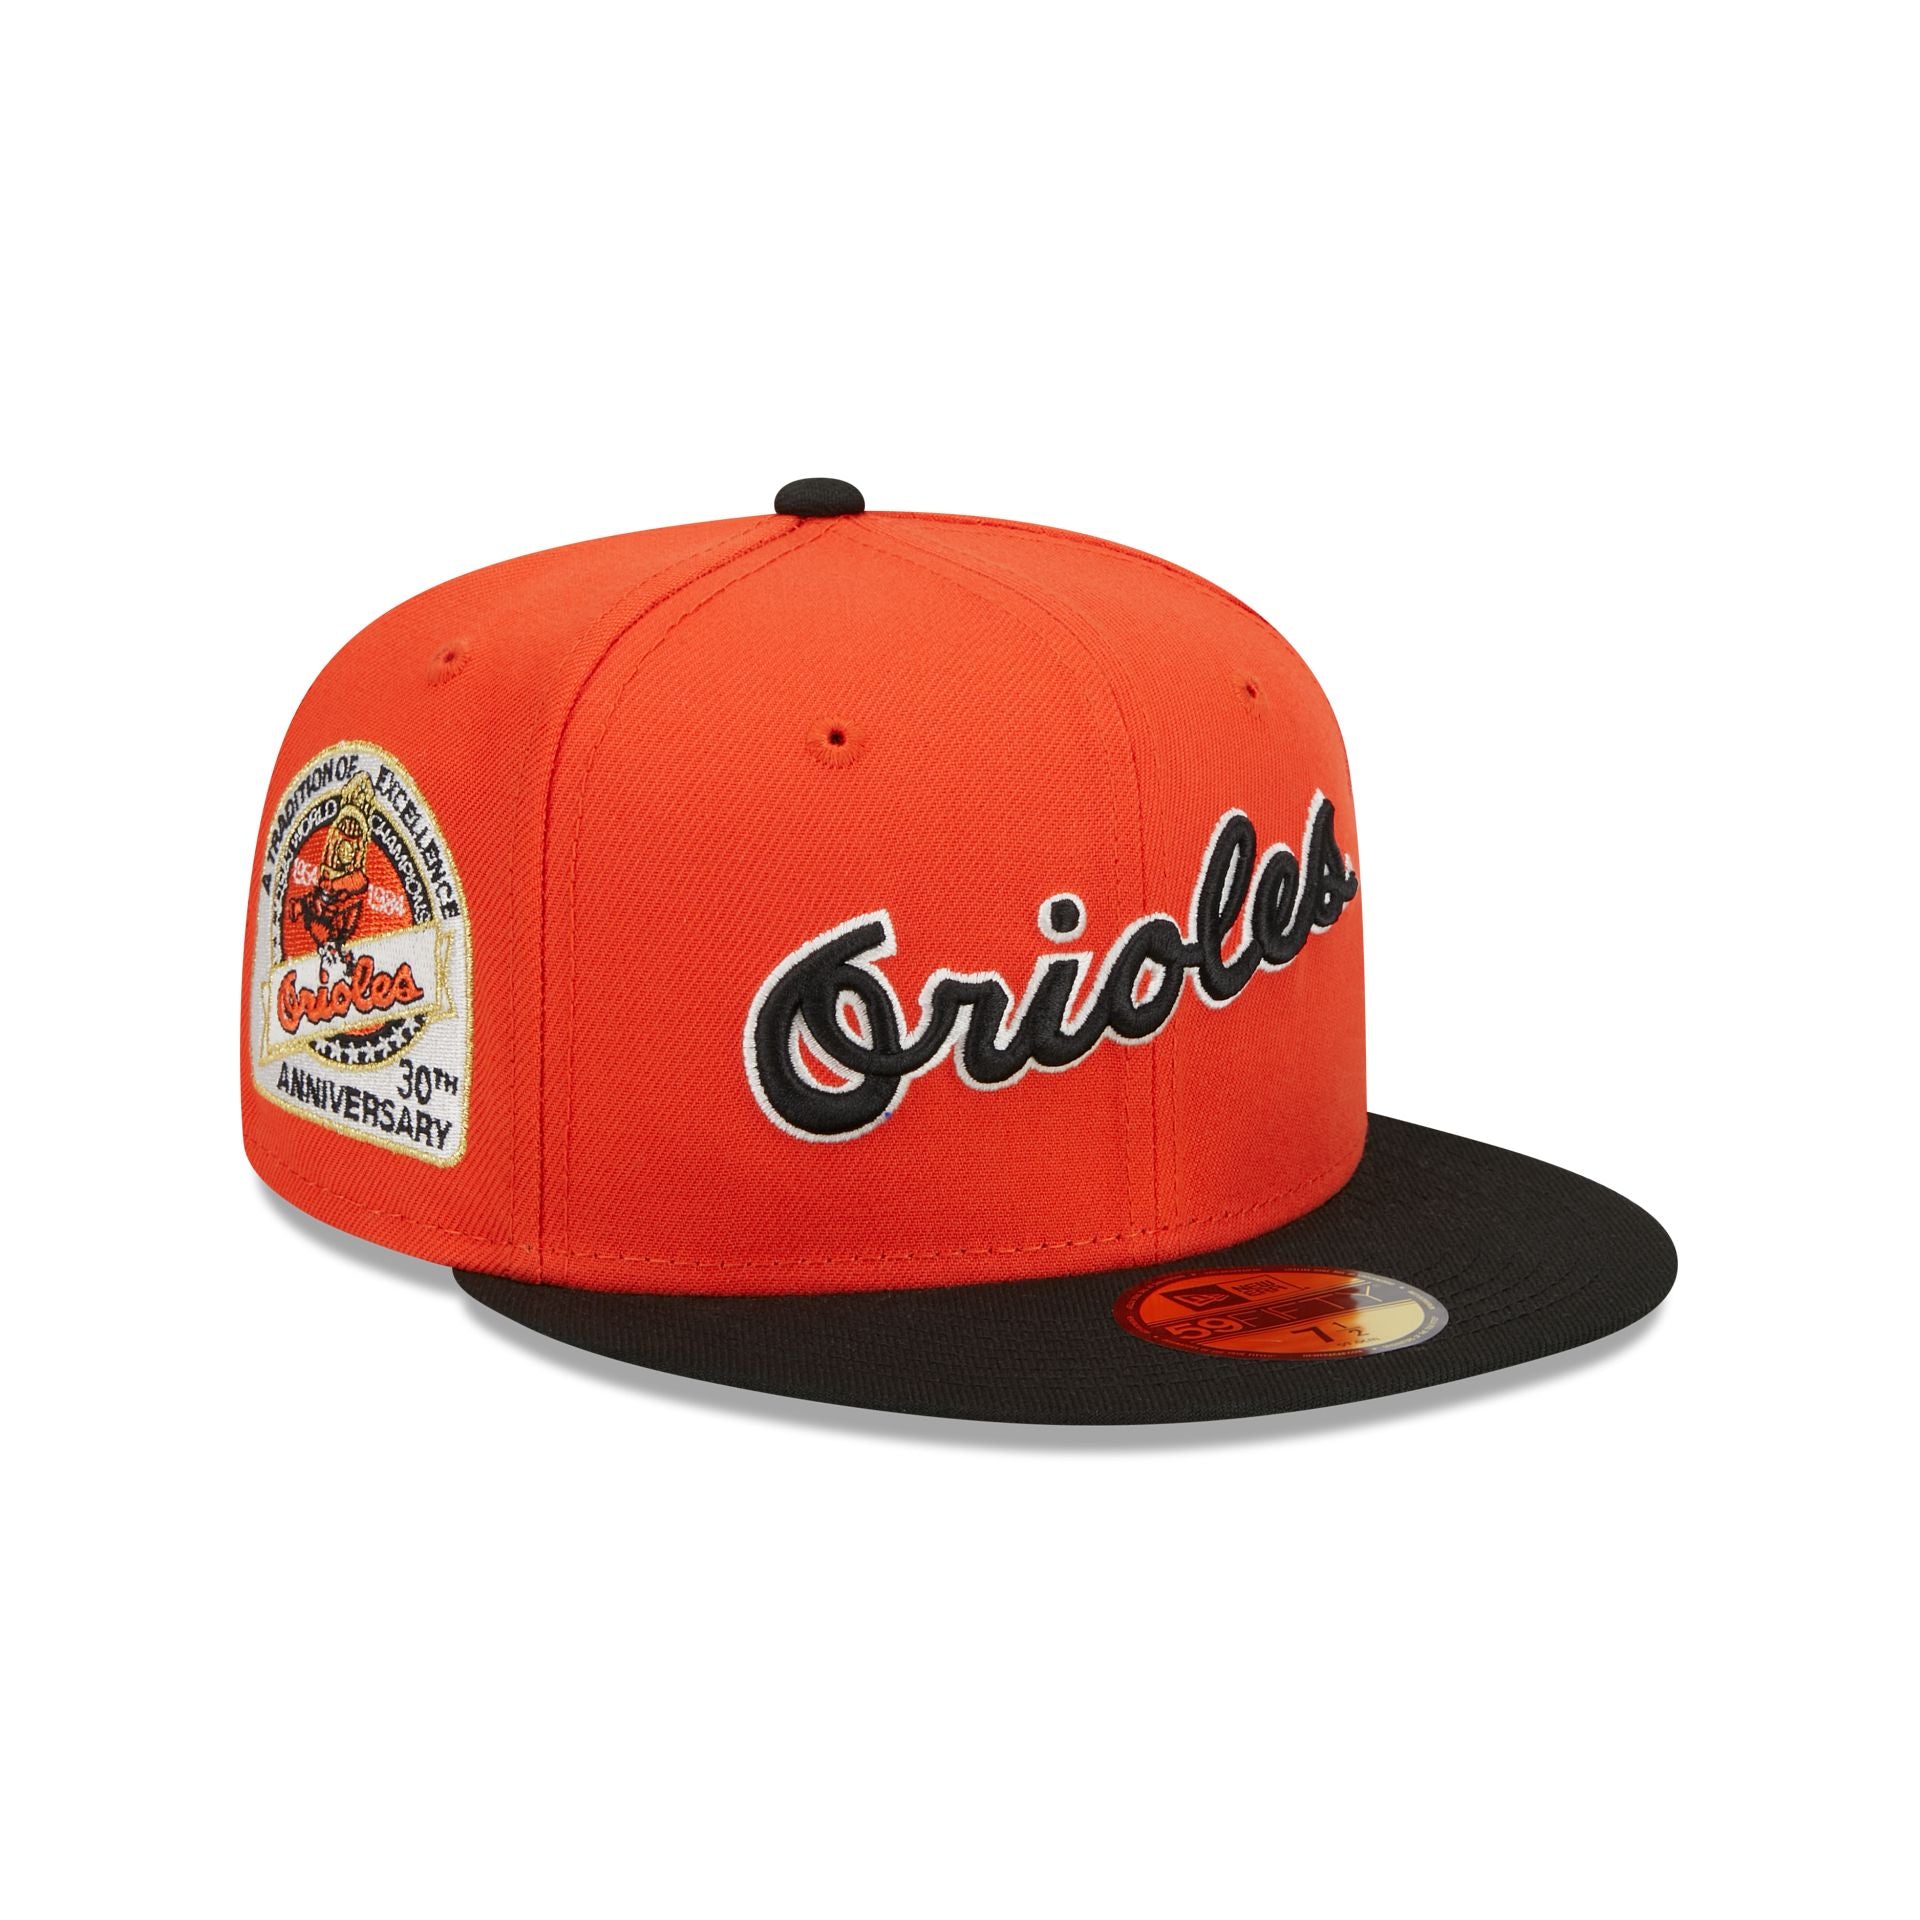 BALTIMORE ORIOLES NEW ERA HAT 59FIFTY LOW PROFILE FITTED BATTING